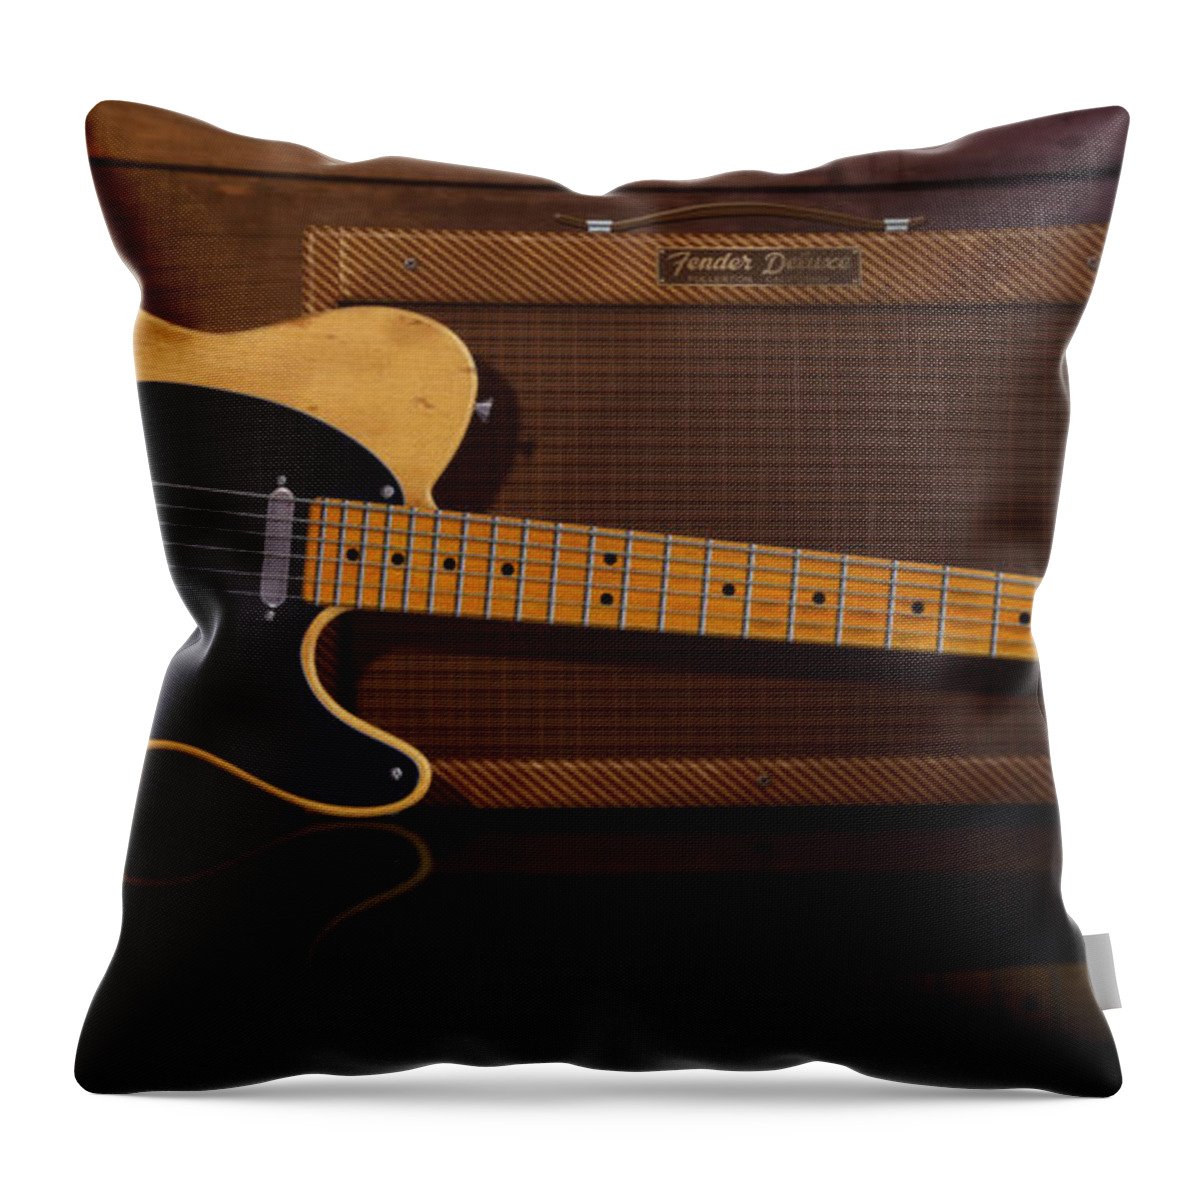 Telecaster Throw Pillow featuring the digital art Tele Deluxe by WB Johnston